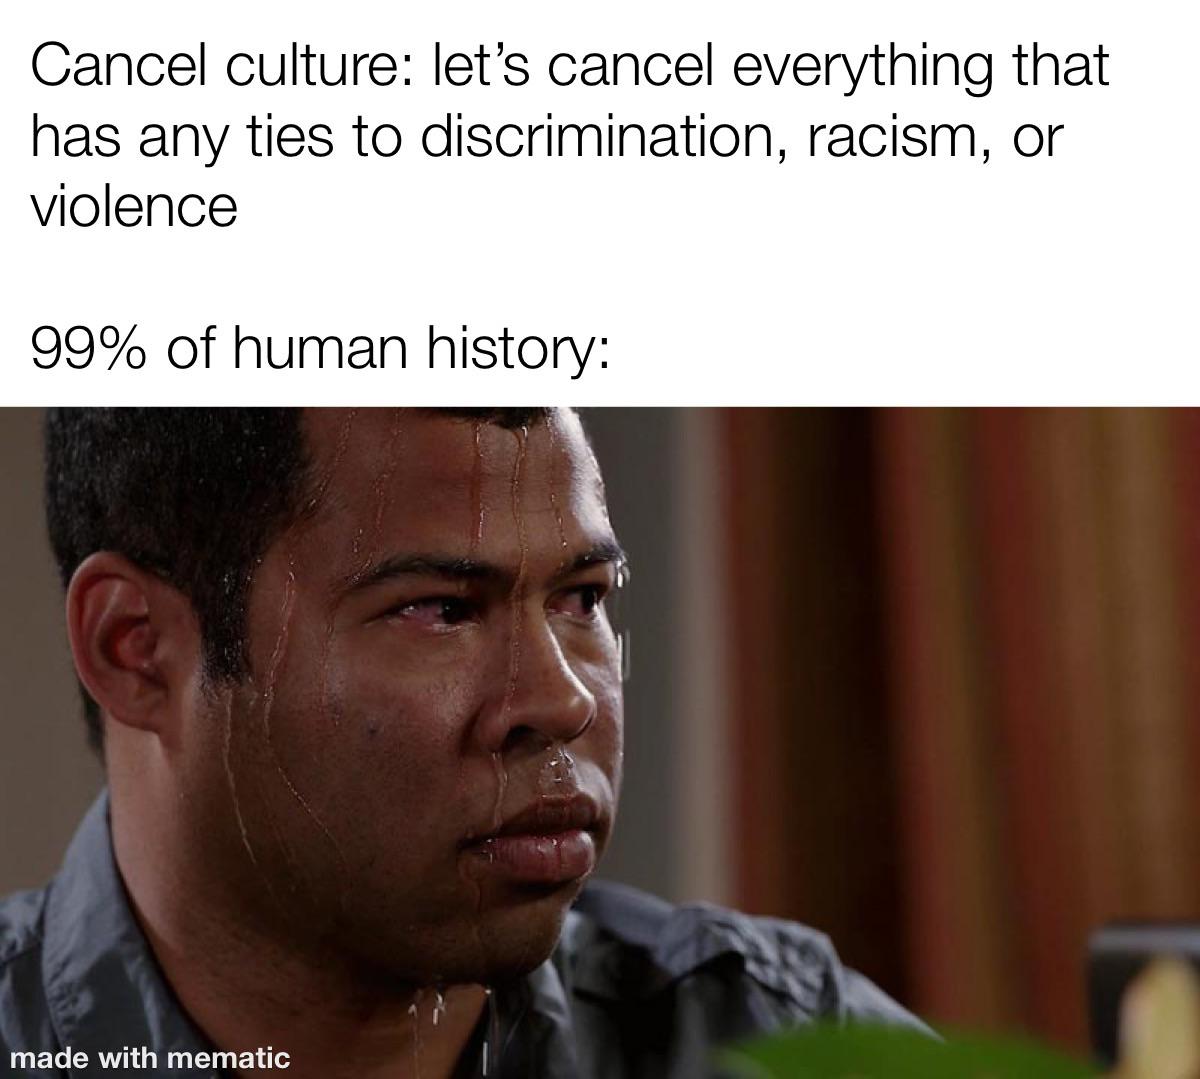 google owner daughter - Cancel culture let's cancel everything that has any ties to discrimination, racism, or violence 99% of human history made with mematic